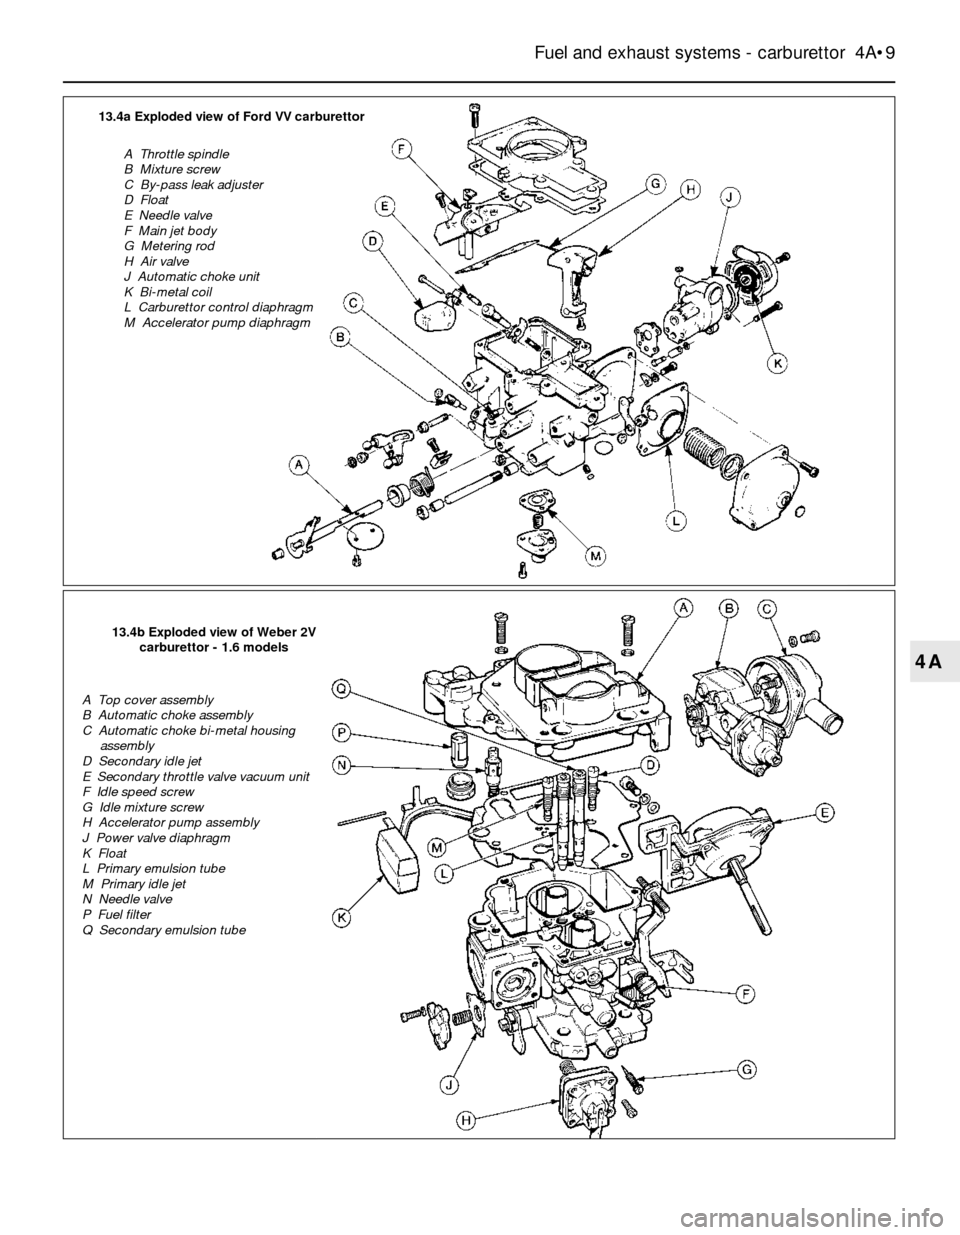 FORD SIERRA 1982 1.G Fuel And Exhaust Systems Carburettor Workshop Manual Fuel and exhaust systems - carburettor  4A•9
4A
13.4a Exploded view of Ford VV carburettor
A  Throttle spindle
B  Mixture screw
C  By-pass leak adjuster
D  Float
E  Needle valve
F  Main jet body
G  